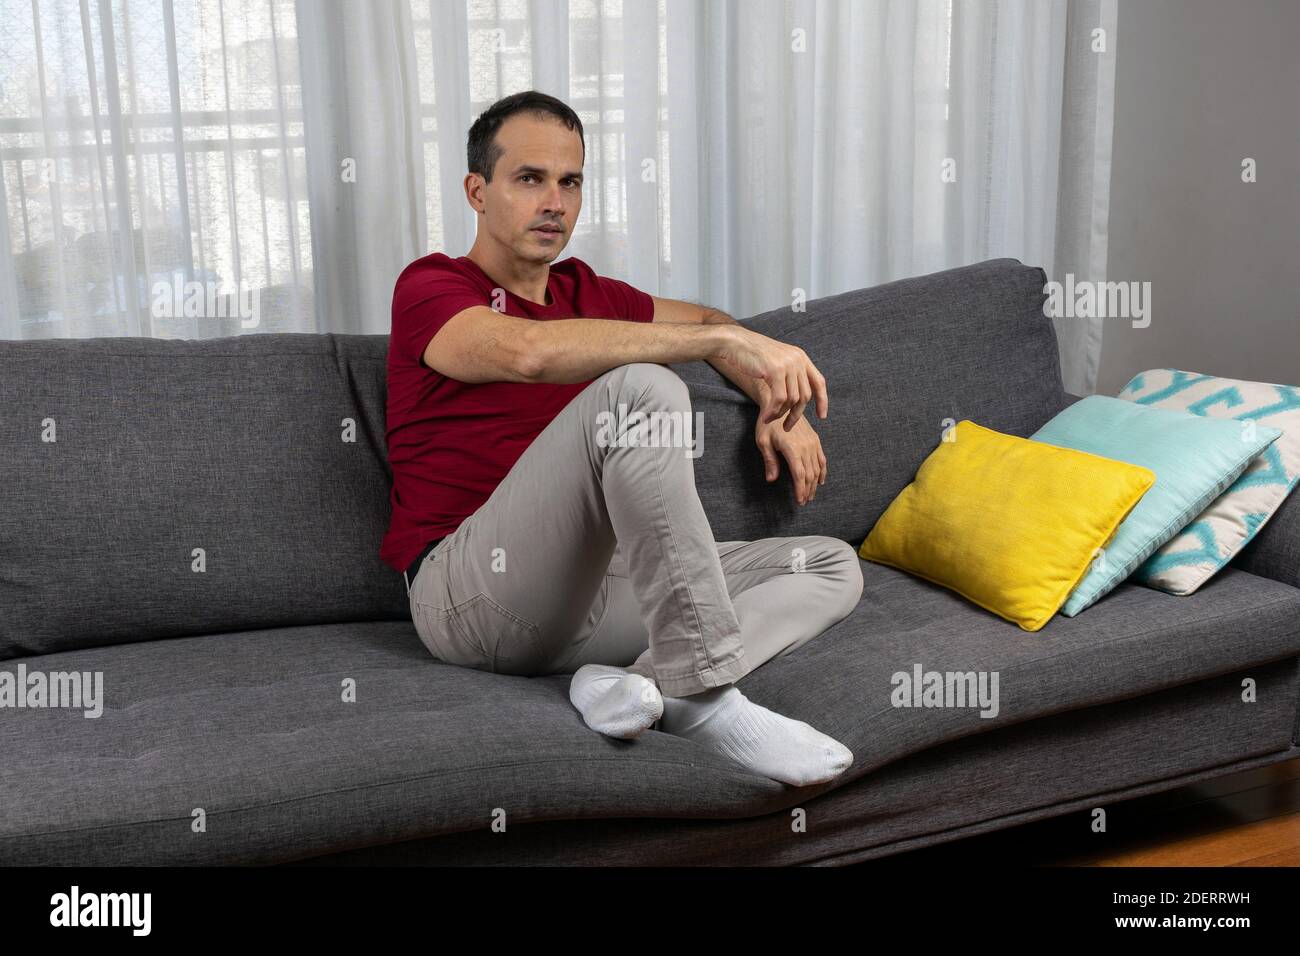 Mature man (44 years old) sitting on the couch, with socks and beside colorful pillows. Stock Photo